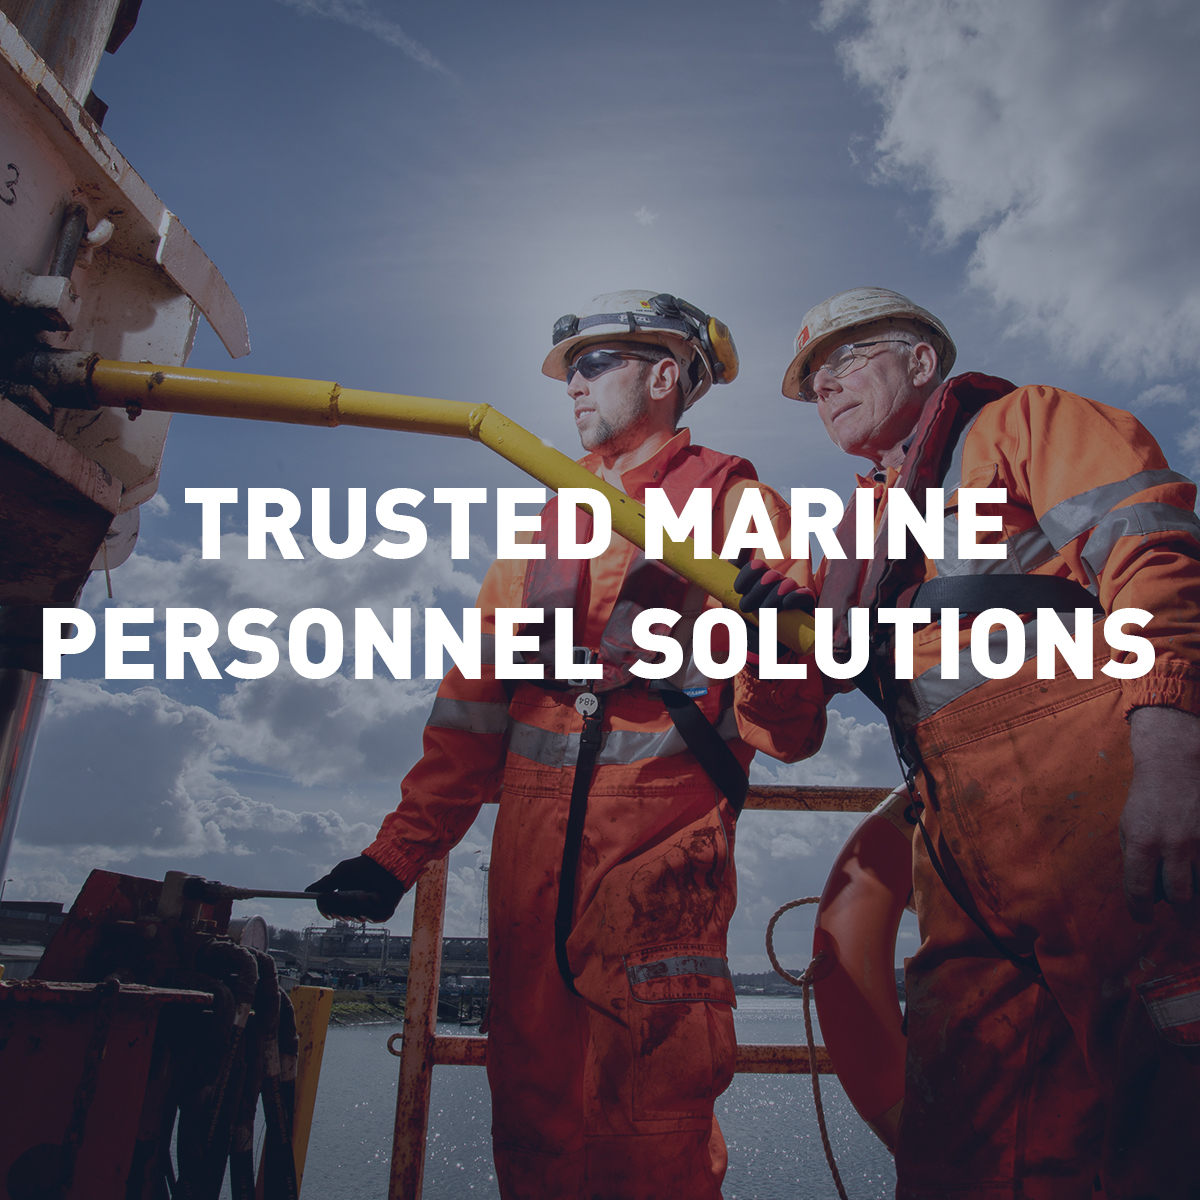 TRUSTED MARINE PERSONNEL SOLUTIONS